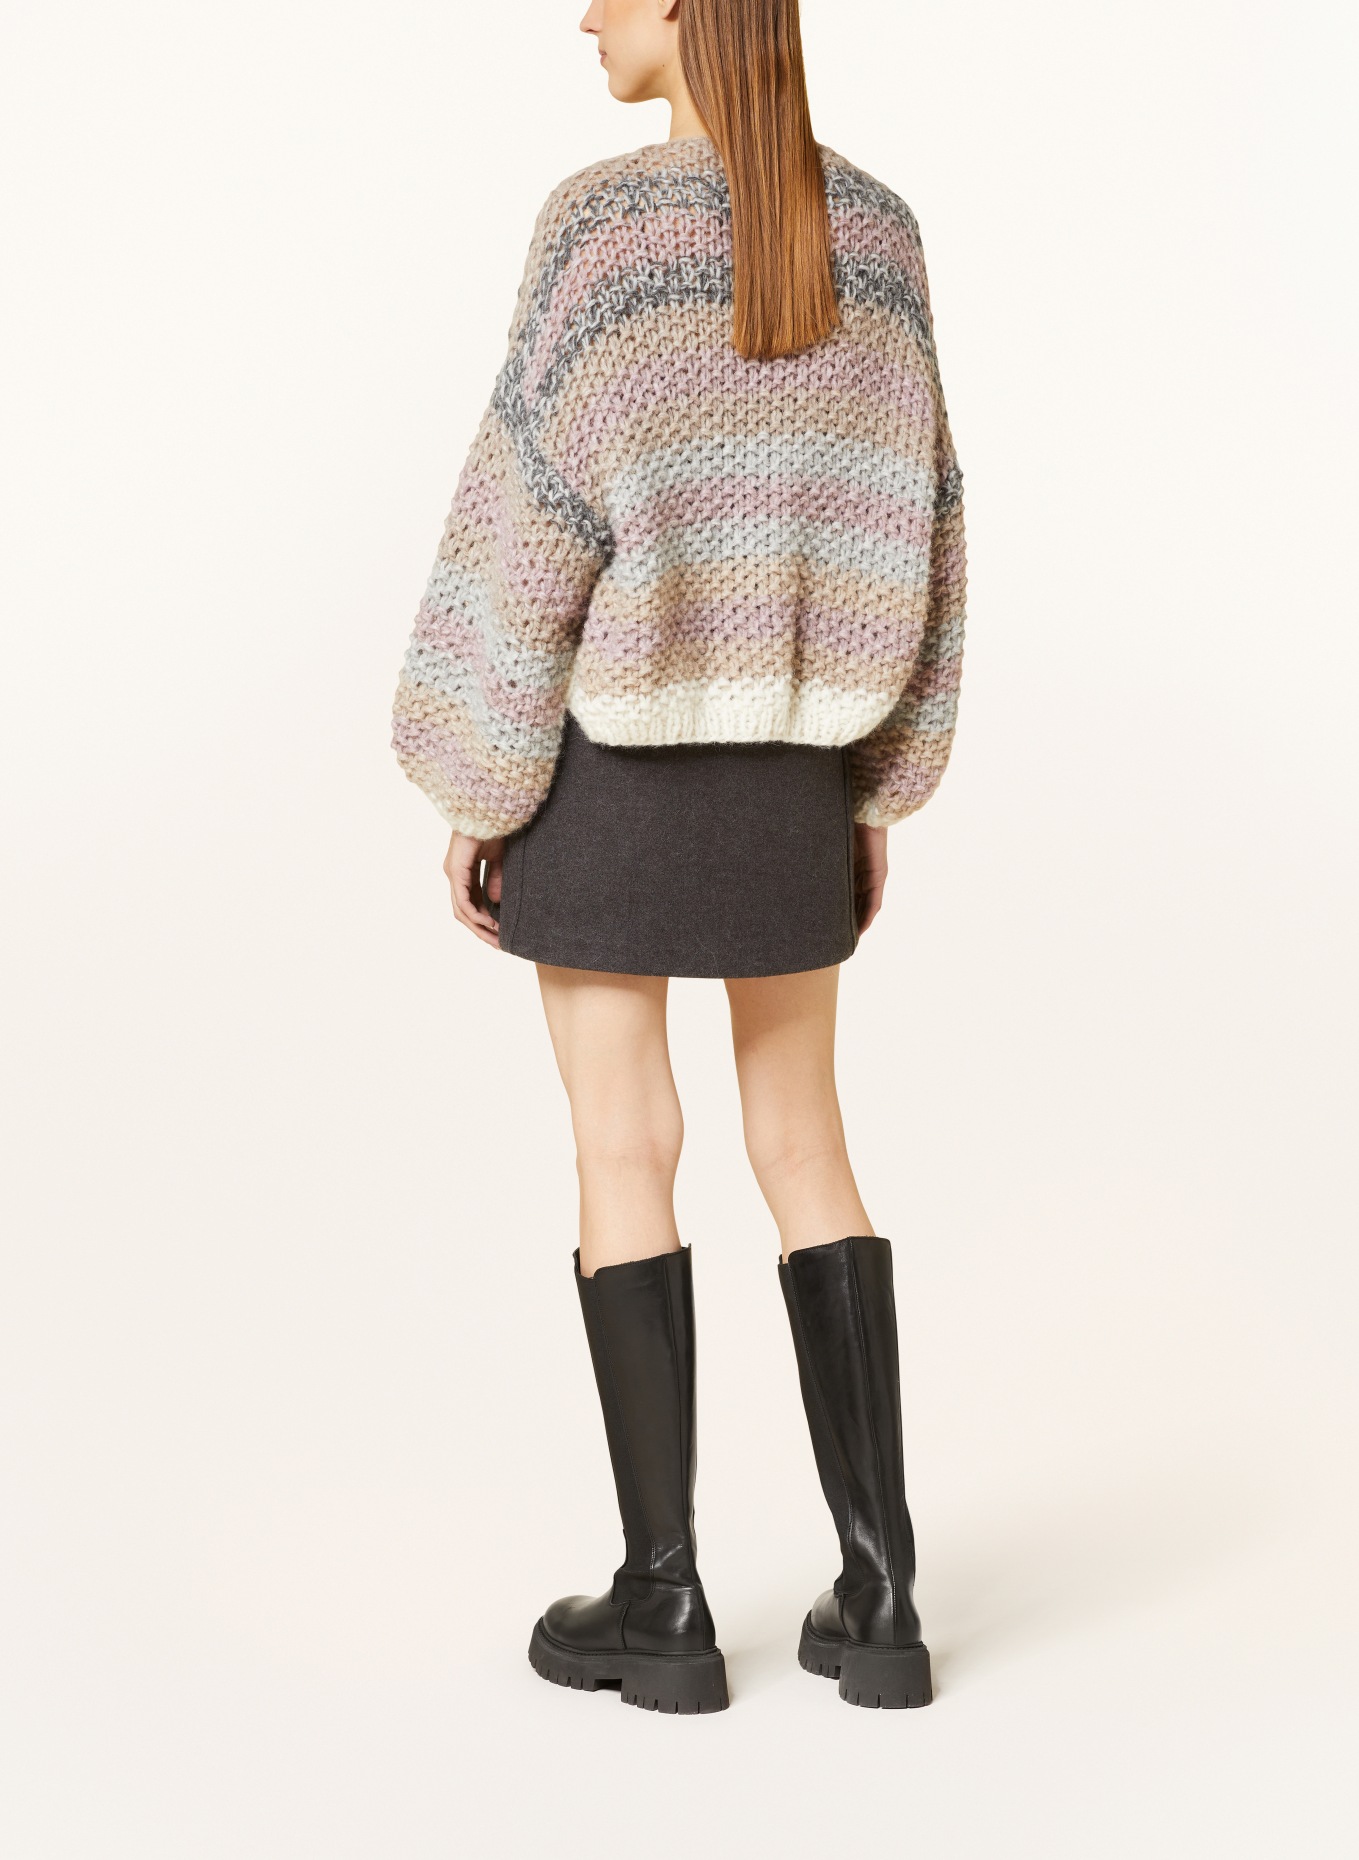 MAIAMI Knit cardigan made of alpaca, Color: BEIGE/ ROSE/ GRAY (Image 3)